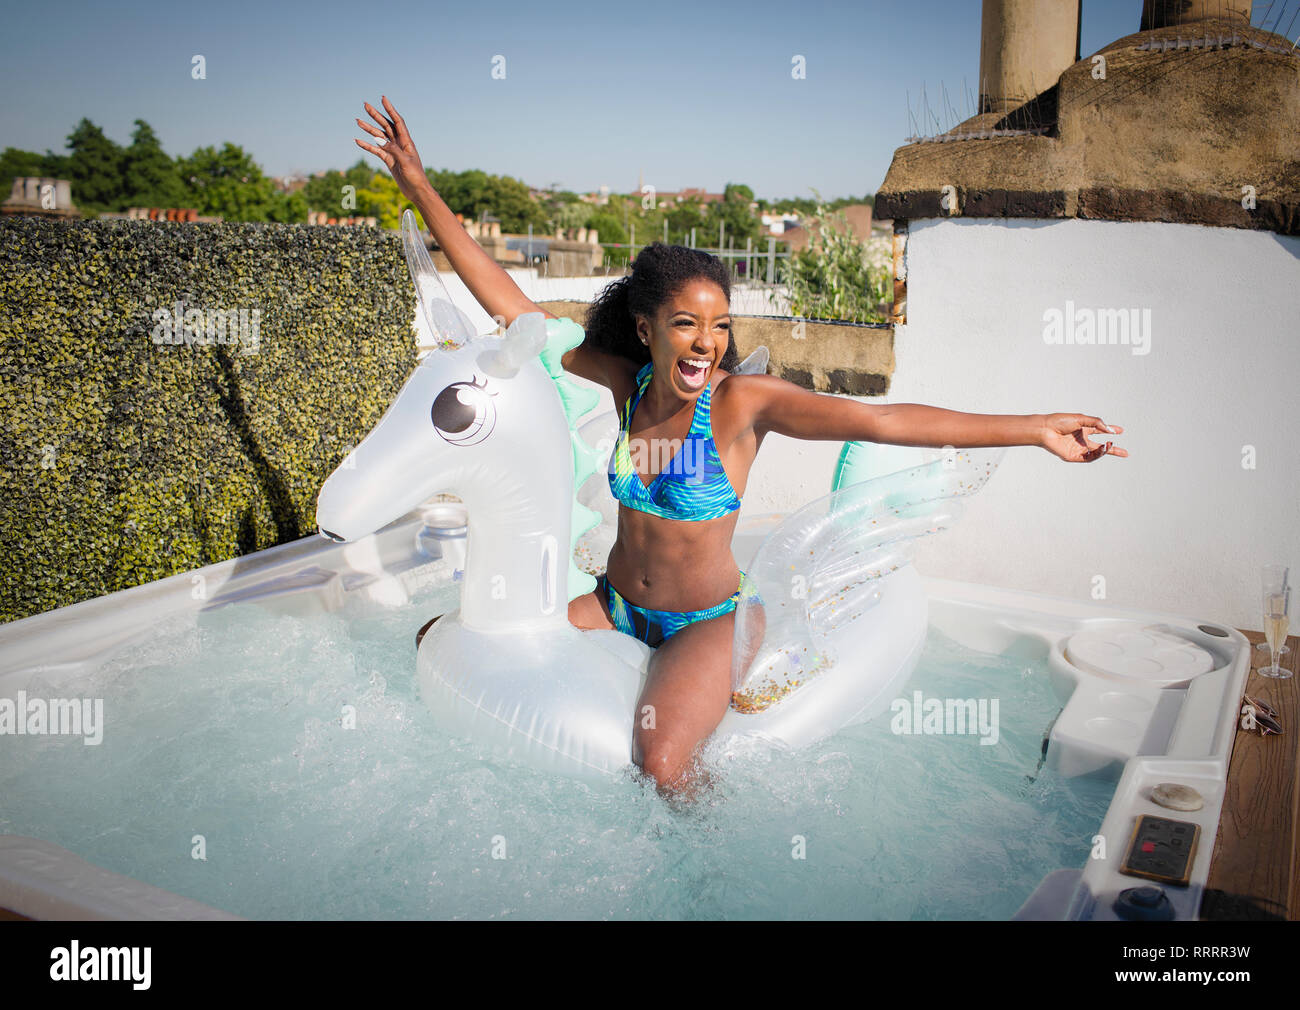 Playful, exuberant young woman in bikini sitting n inflatable pegasus in rooftop hot tub Stock Photo